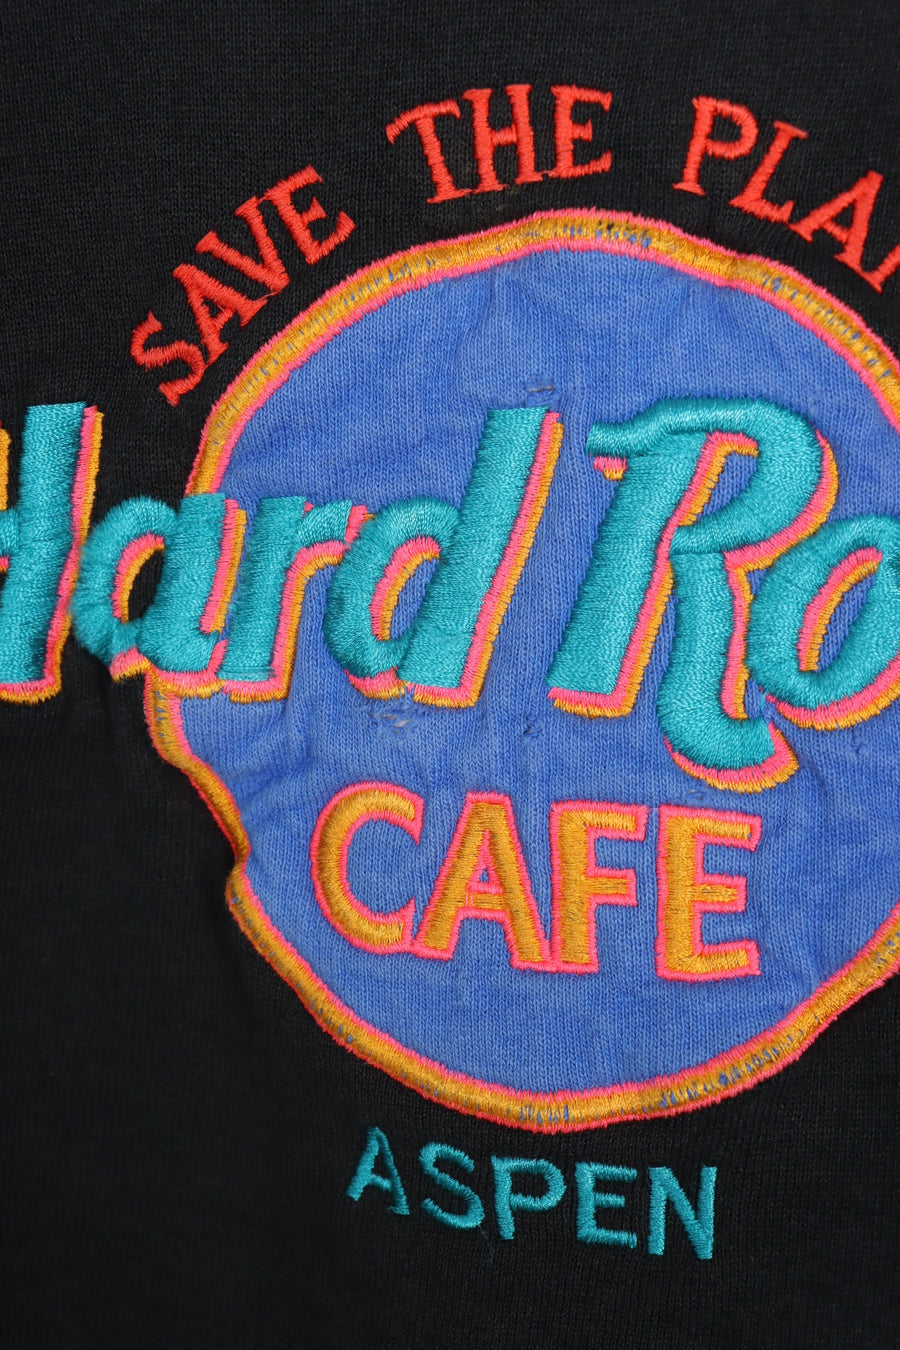 HARD ROCK CAFE Aspen 'Save the Planet' Embroidered Sweatshirt USA Made (M)